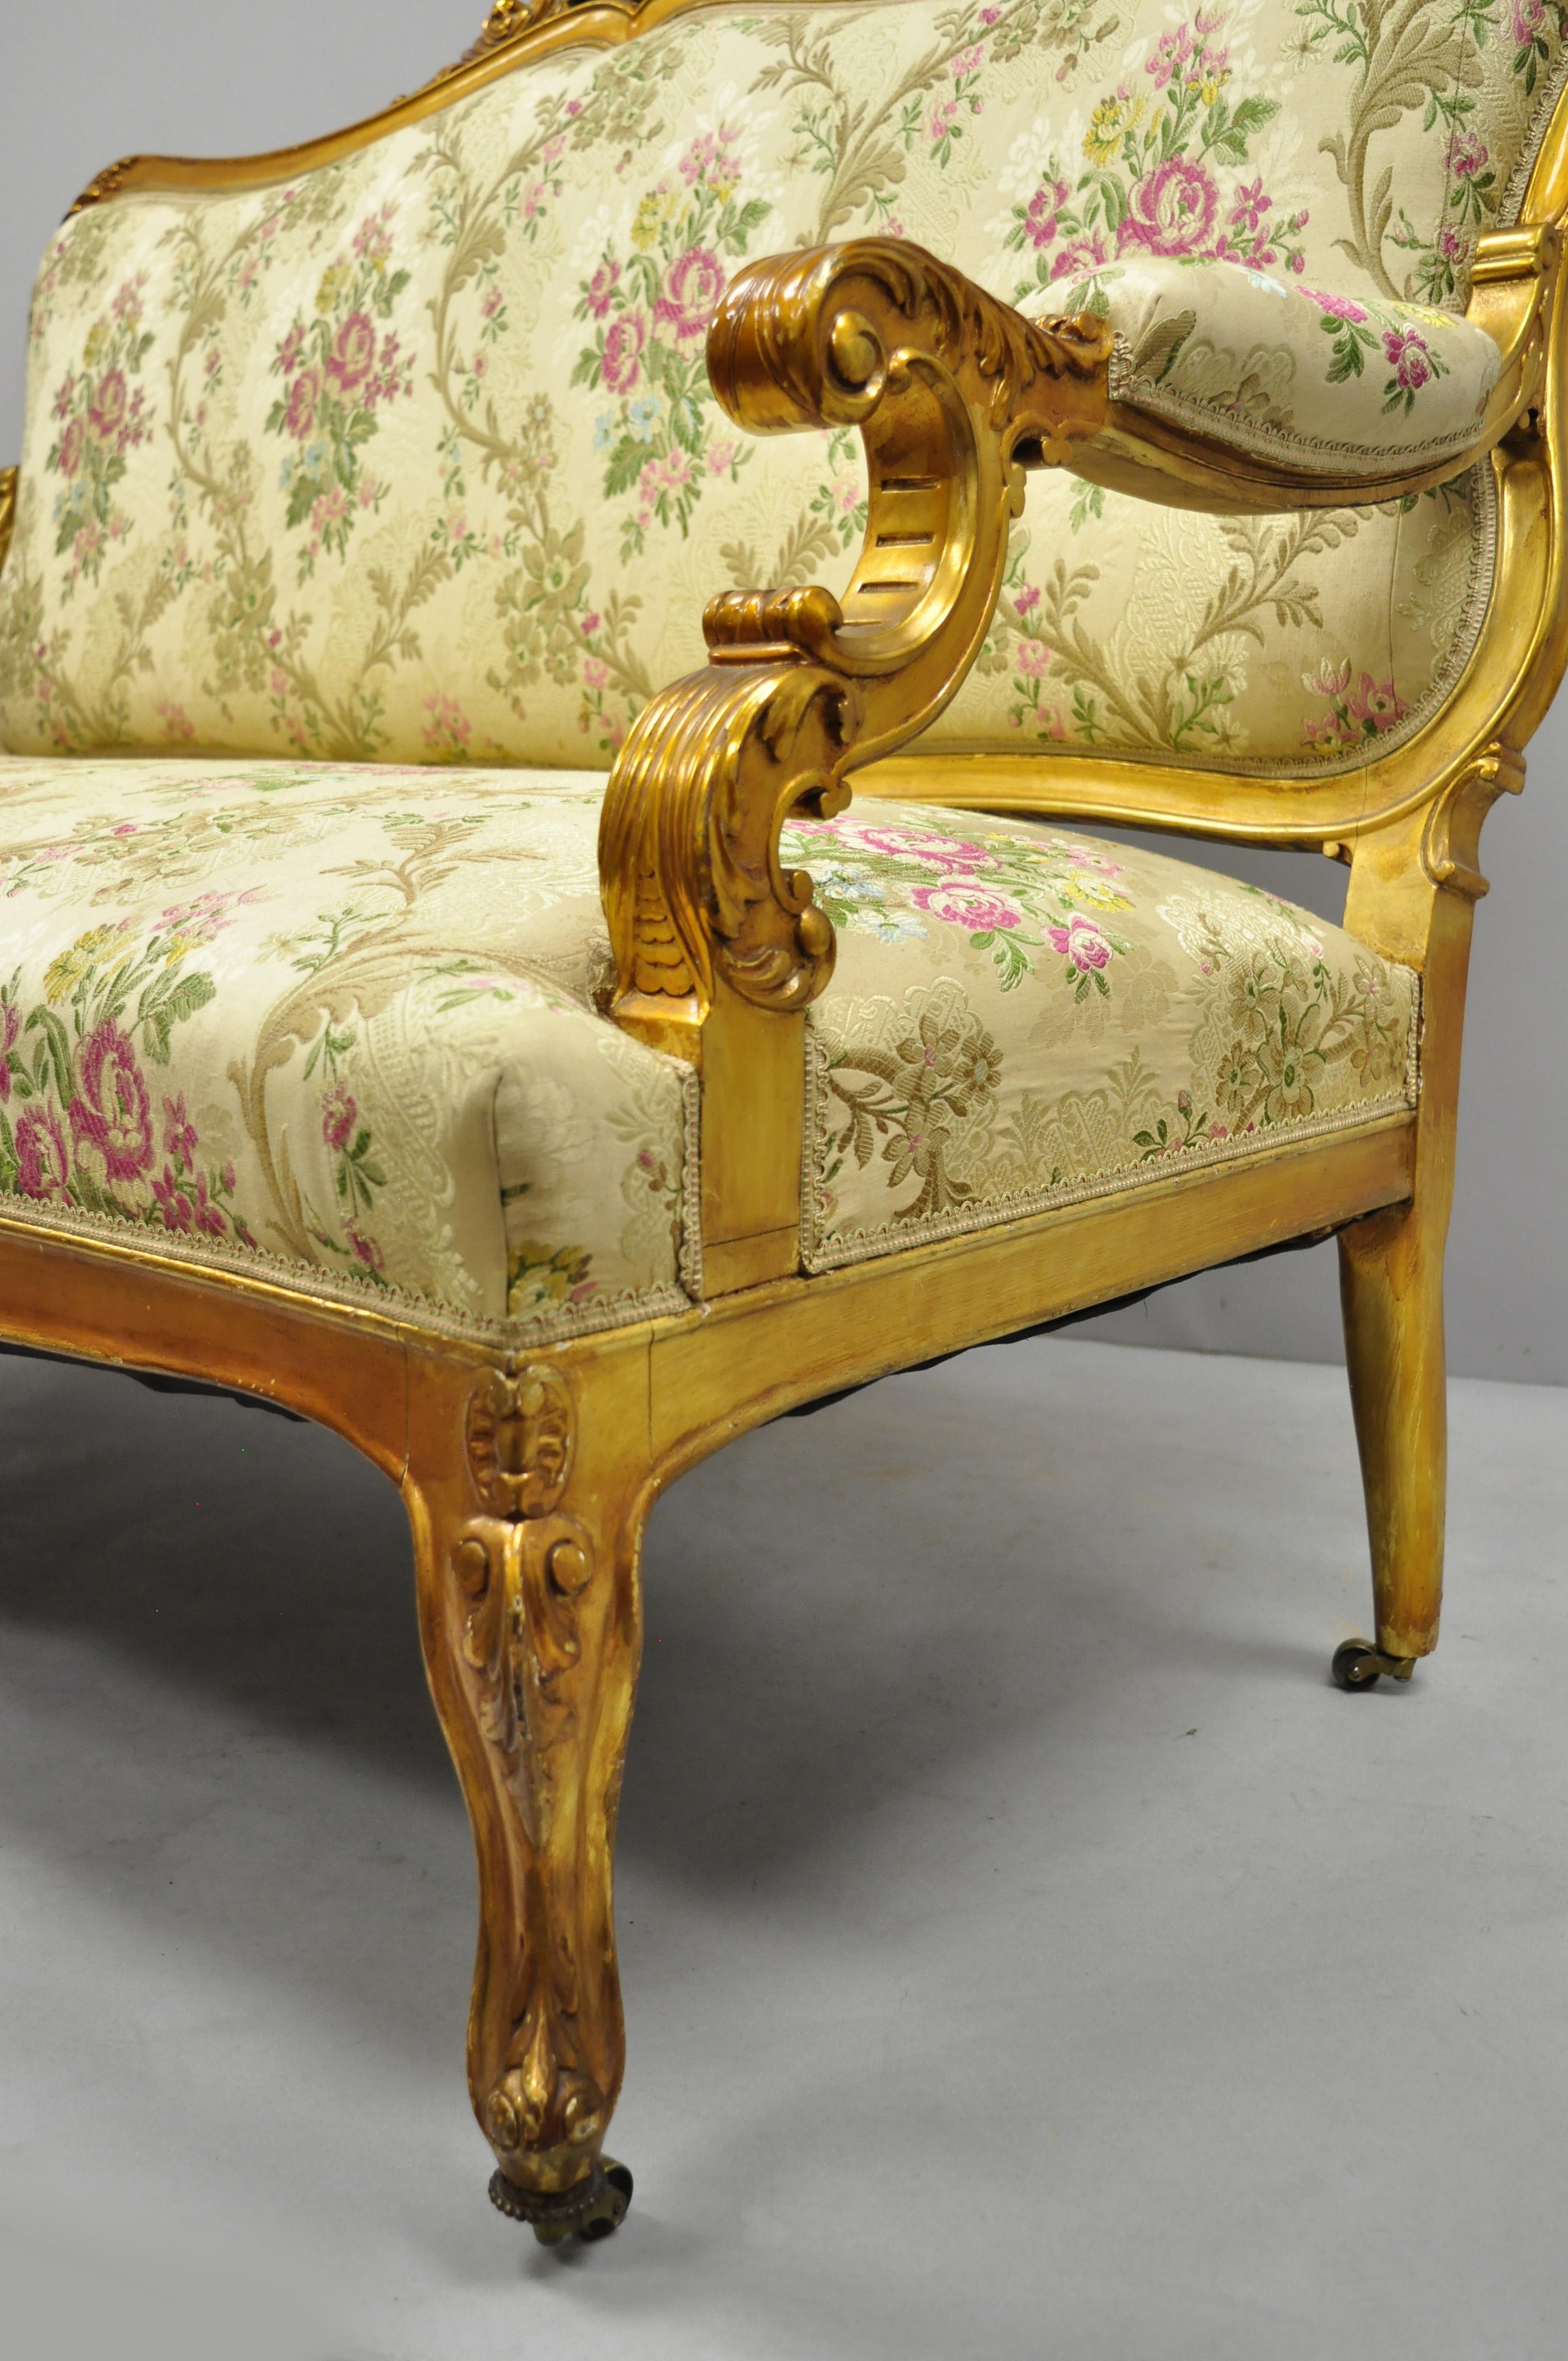 20th Century 1920s, French, Louis XV Style Gold Gilt Settee Loveseat Sofa